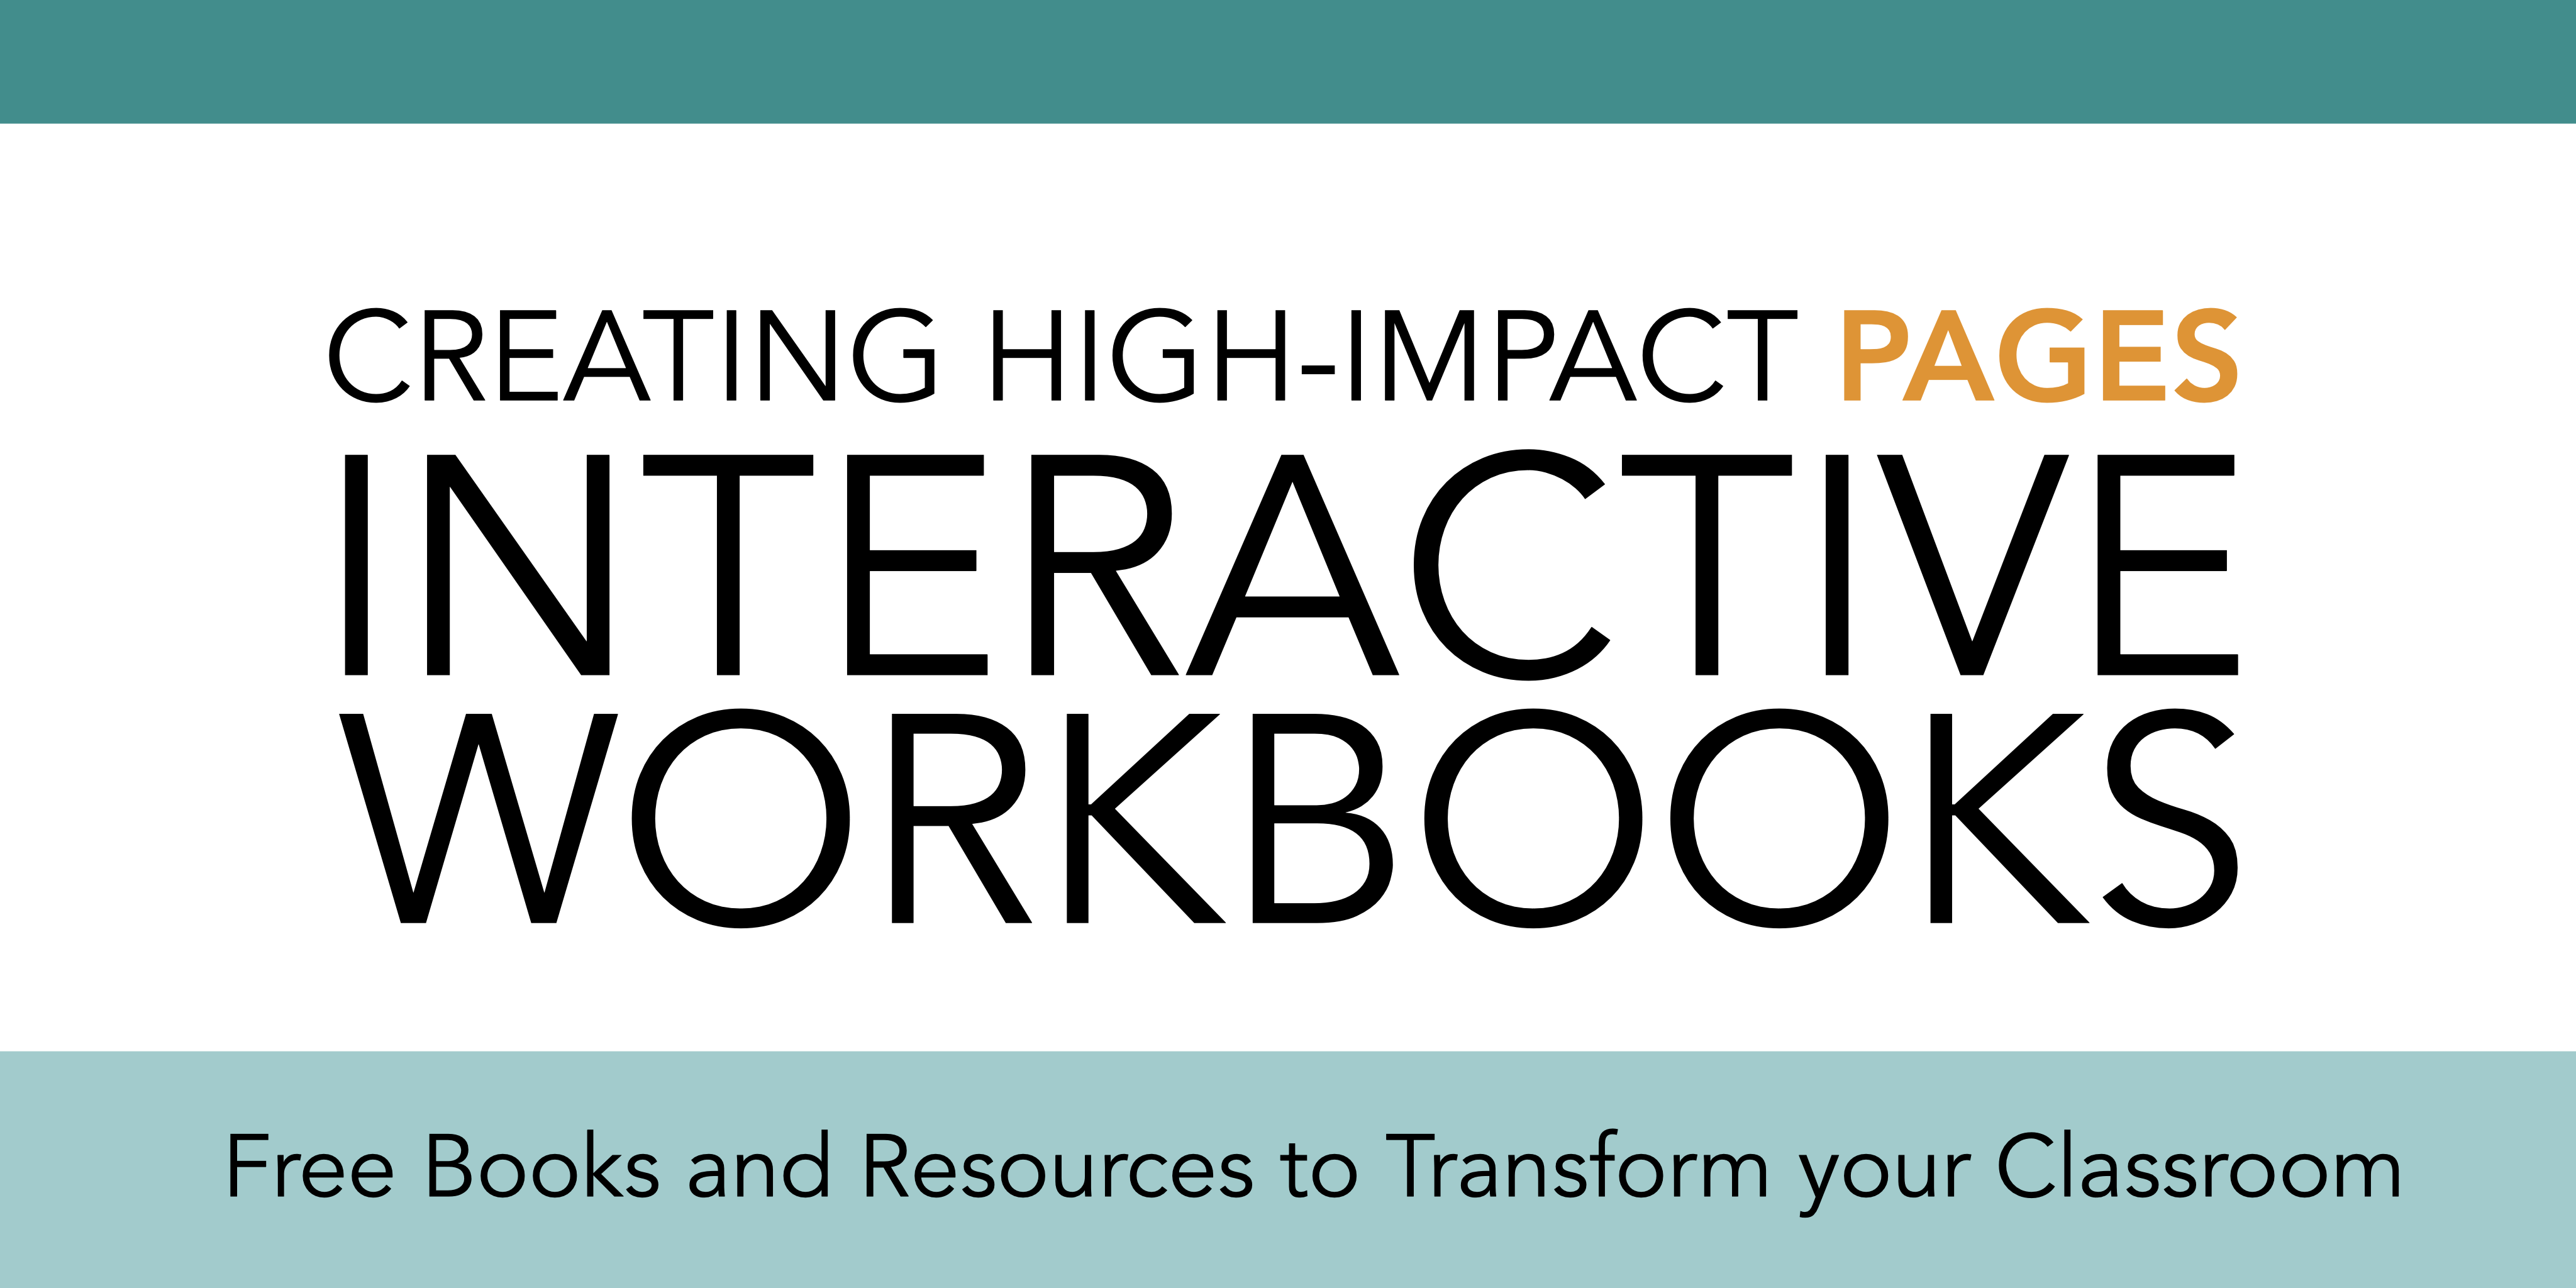 Creating High Impact Pages Interactive Workbooks: Free Books and Resources to Transform your Classroom